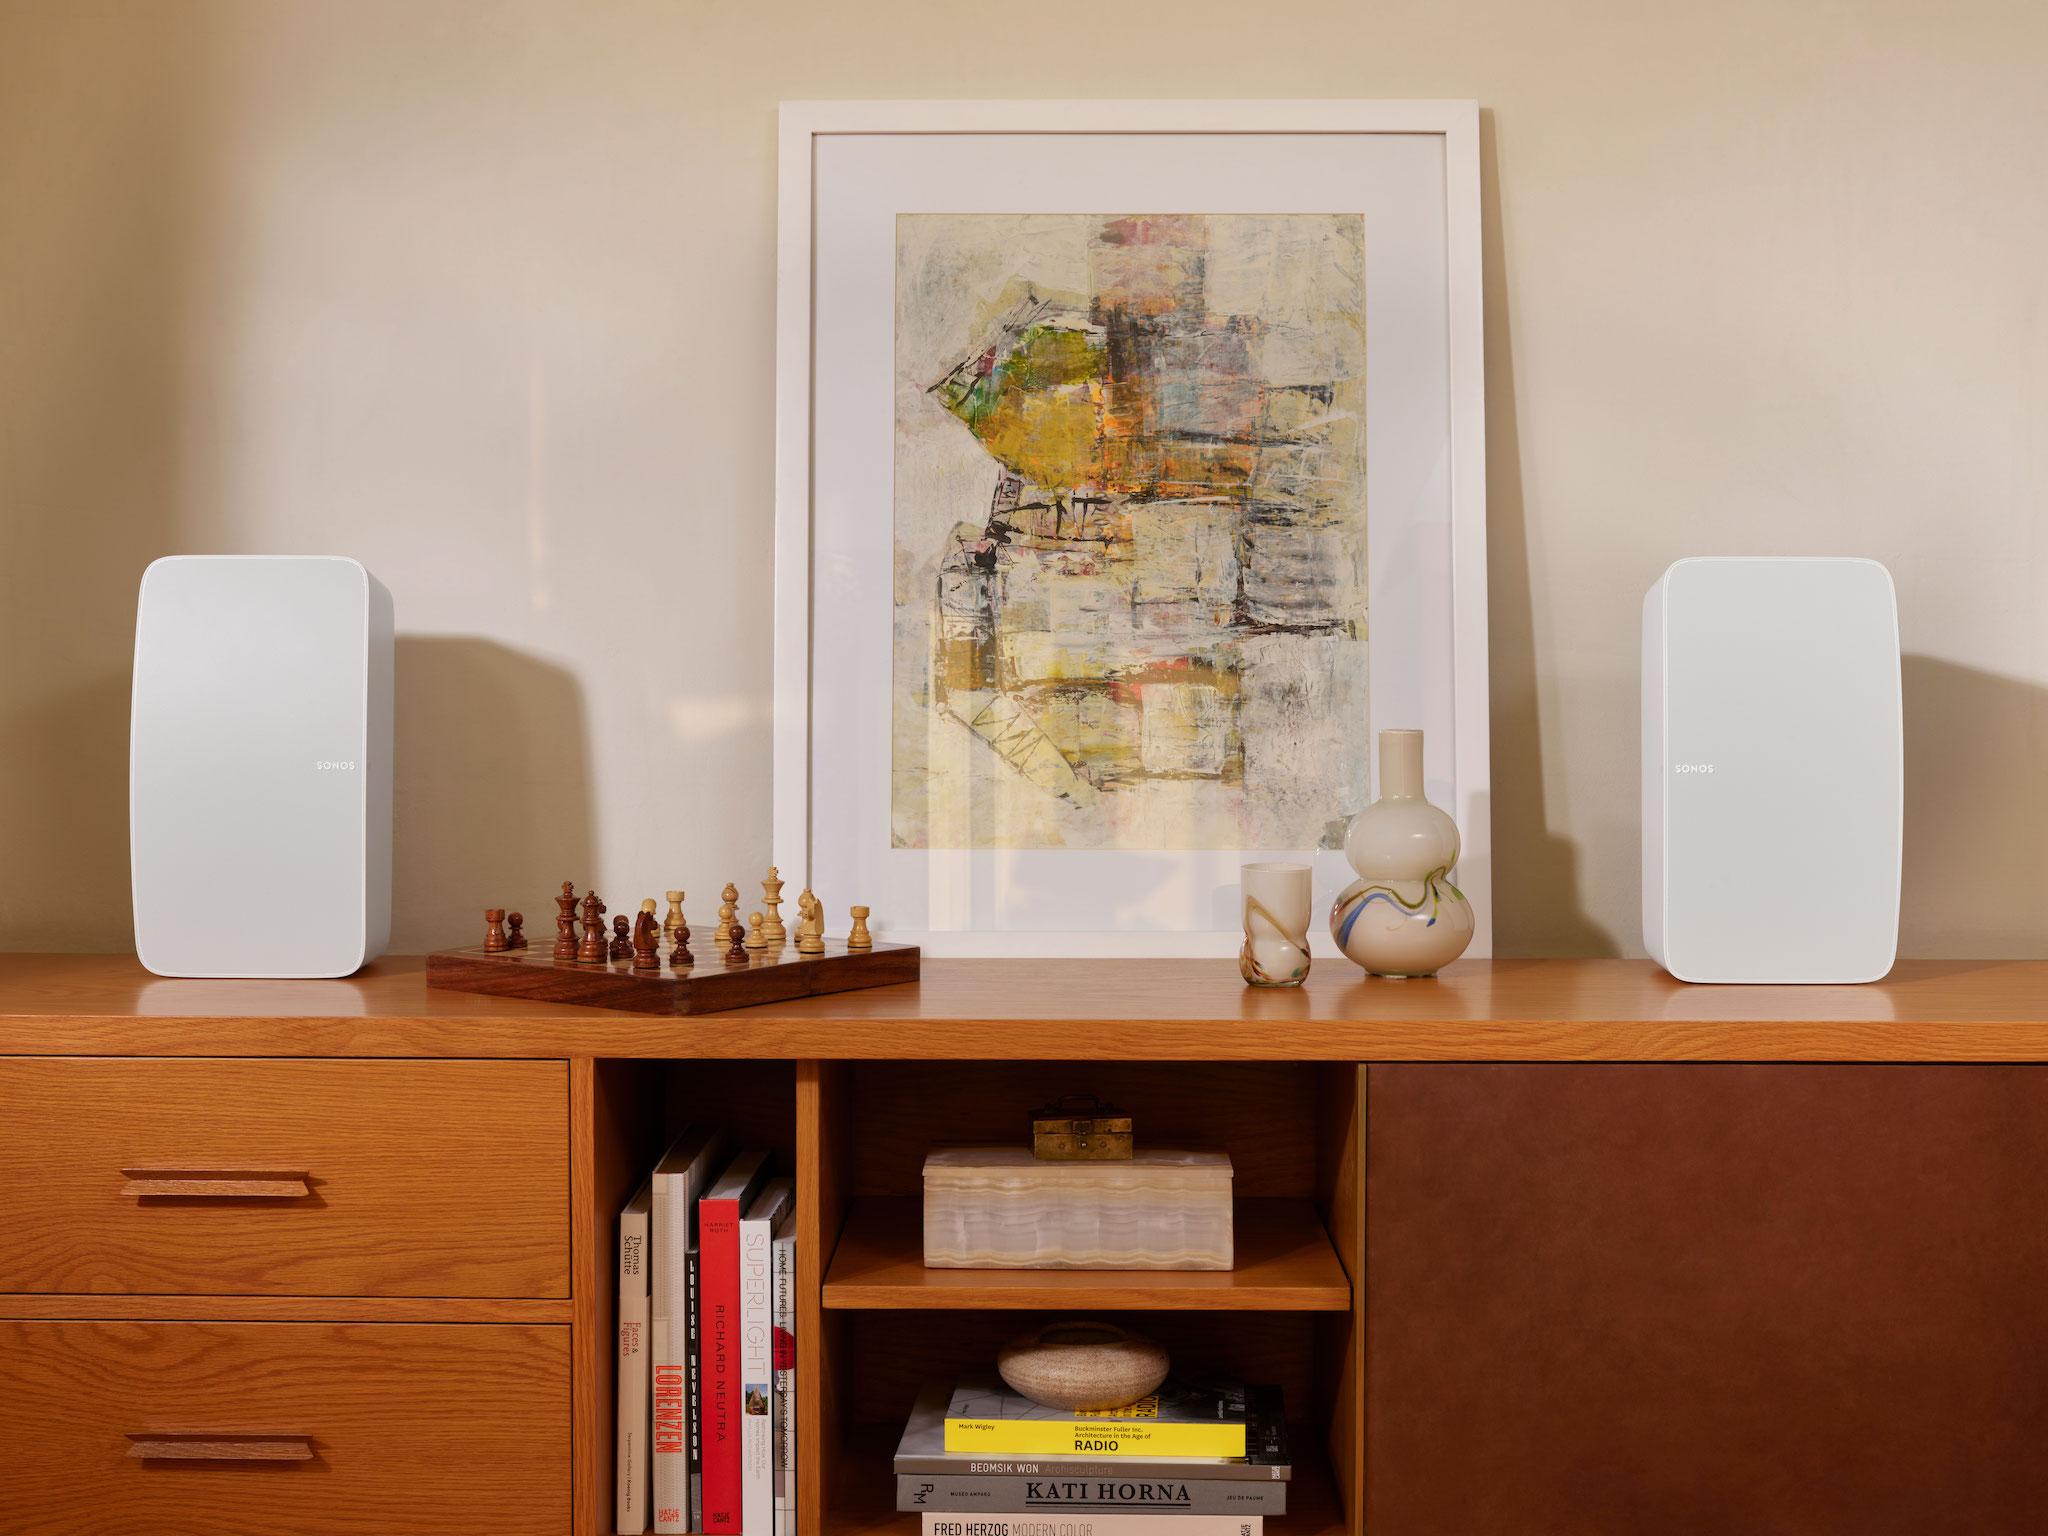 The new Five has the same colour the whole way across its body, like the relatively new Sonos One. The new Sub looks exactly the same as the old one